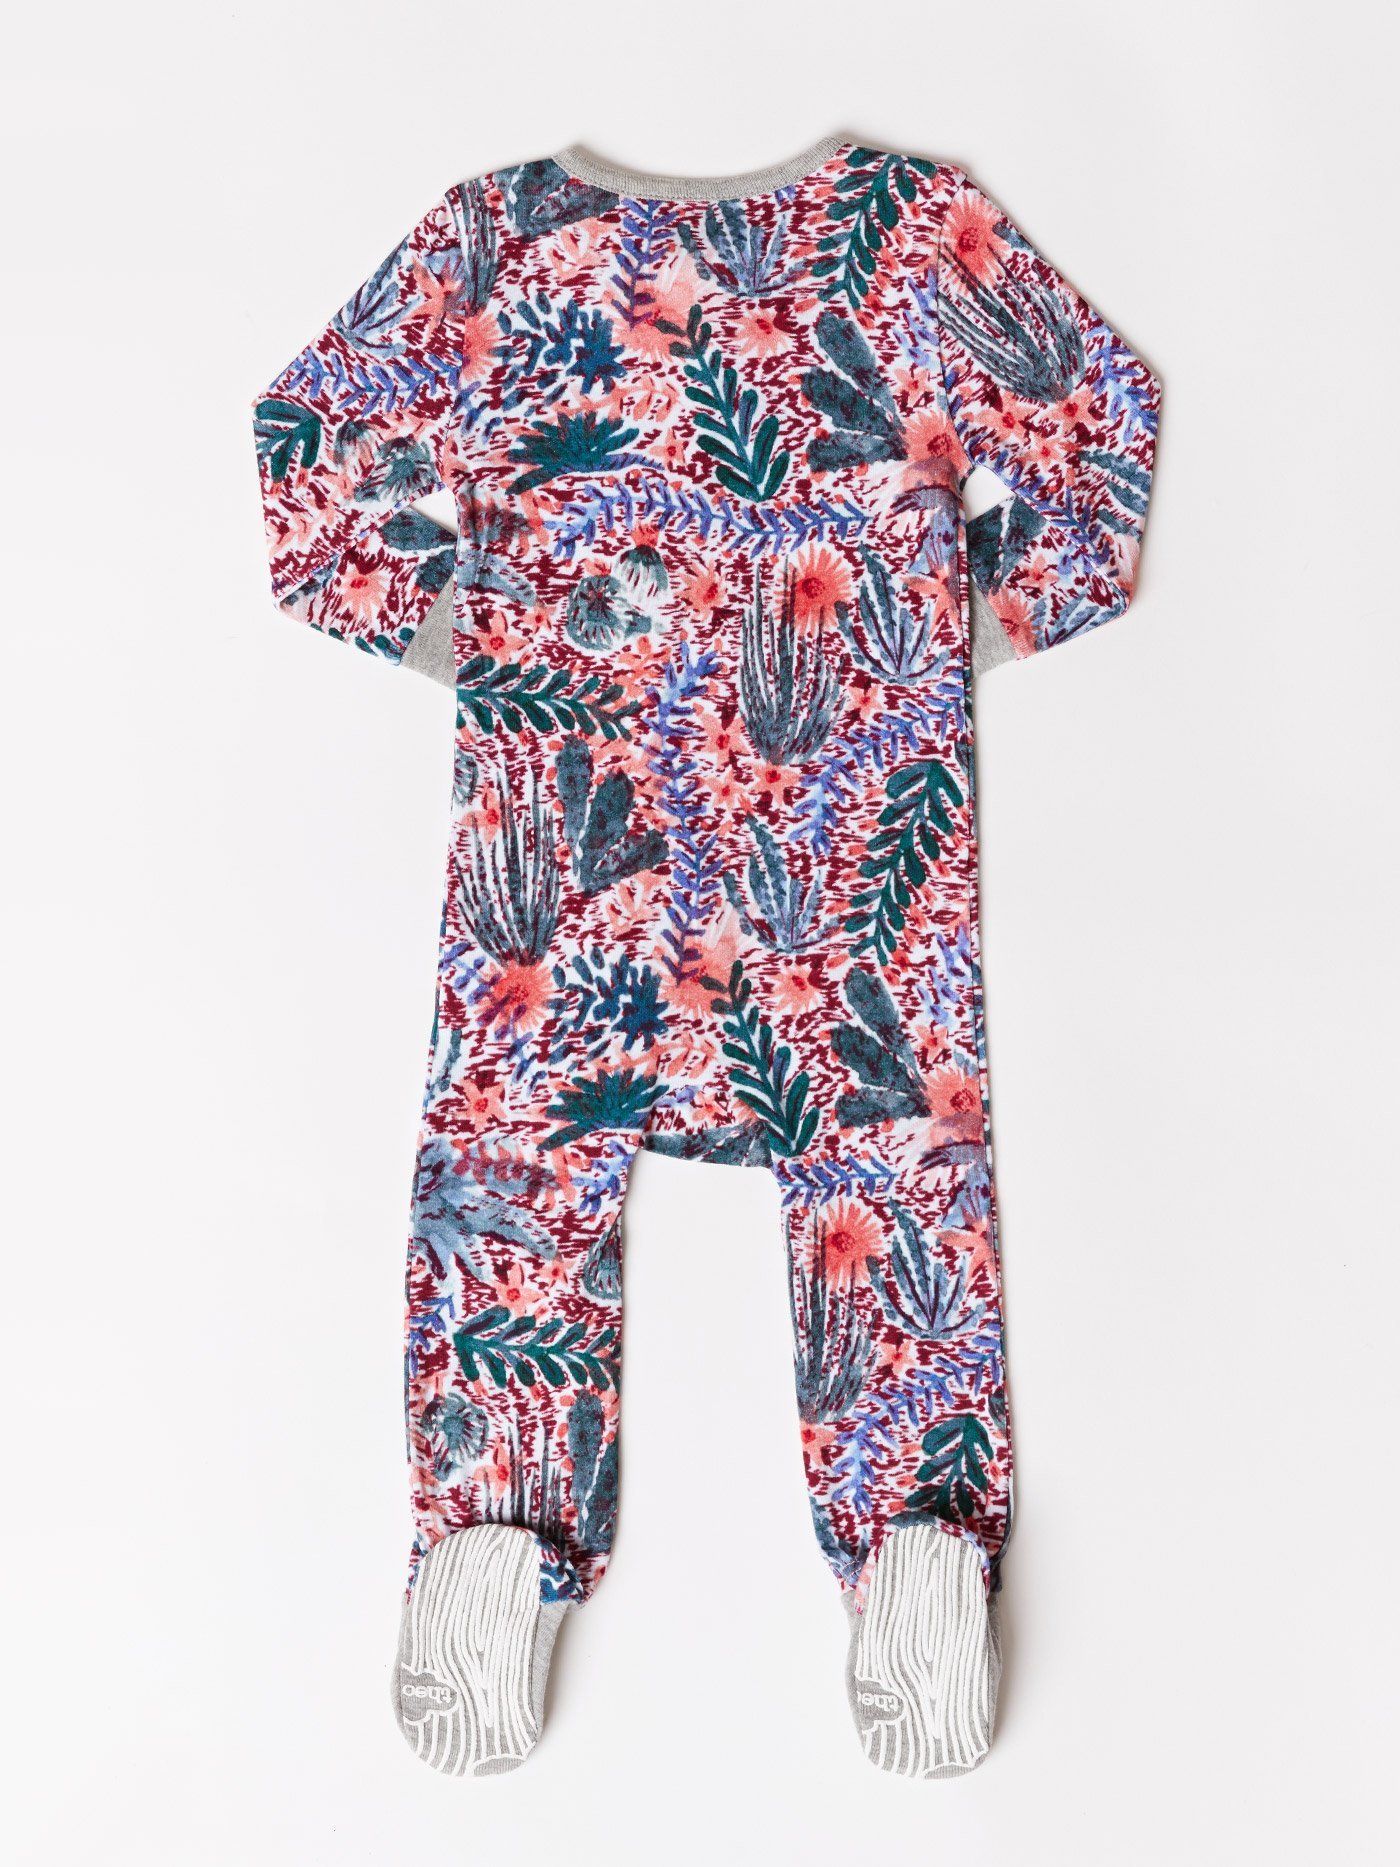 Infant Floral Cactus Footie One-Piece Infant Pajamas Theo+Leigh 